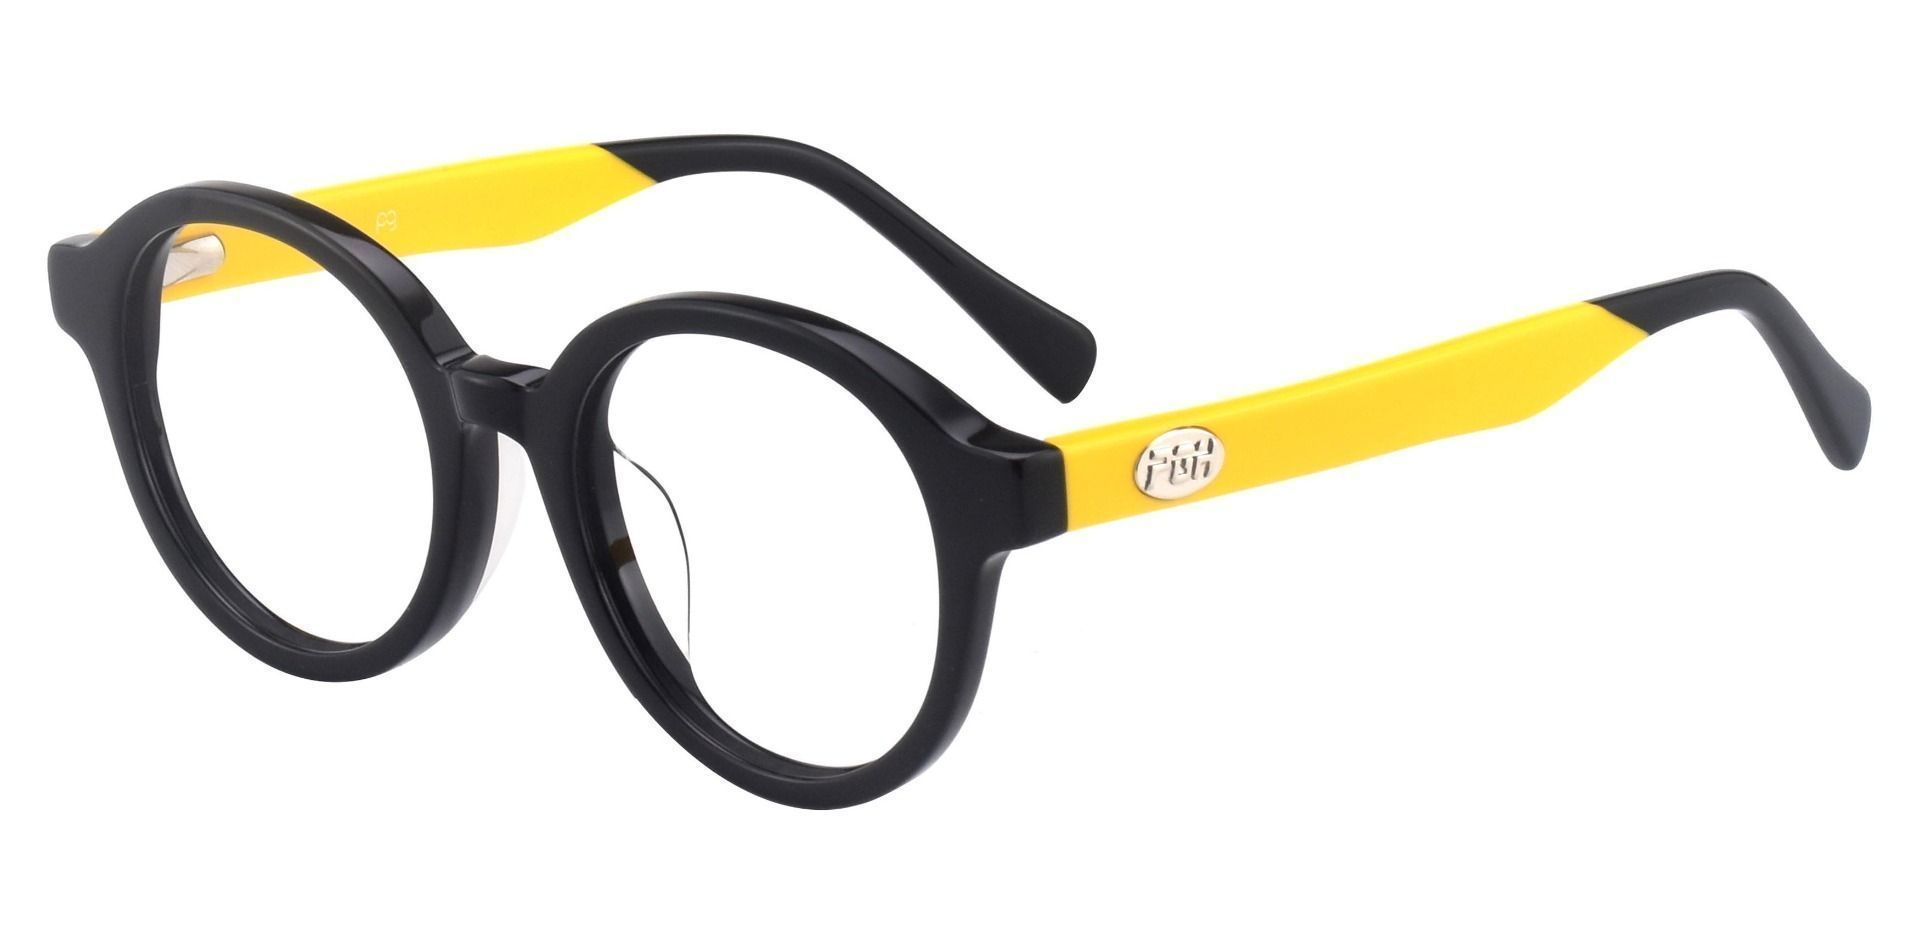 Steel City Round Blue Light Blocking Glasses - The Frame Is Black And Gold